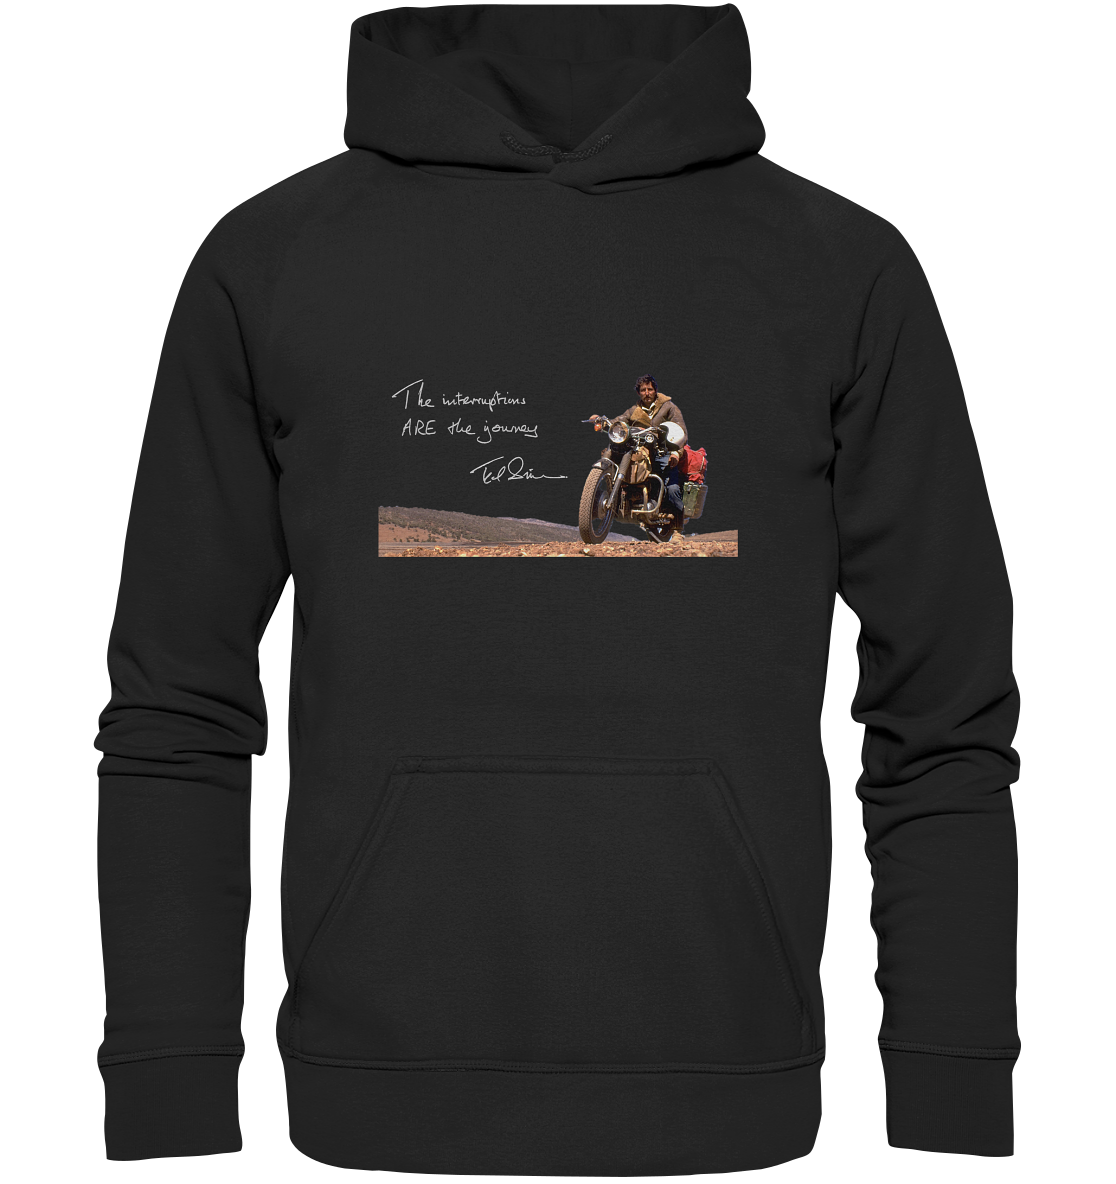 Hoodie "Ted Simon - The Interruptions are the journey." schwarz